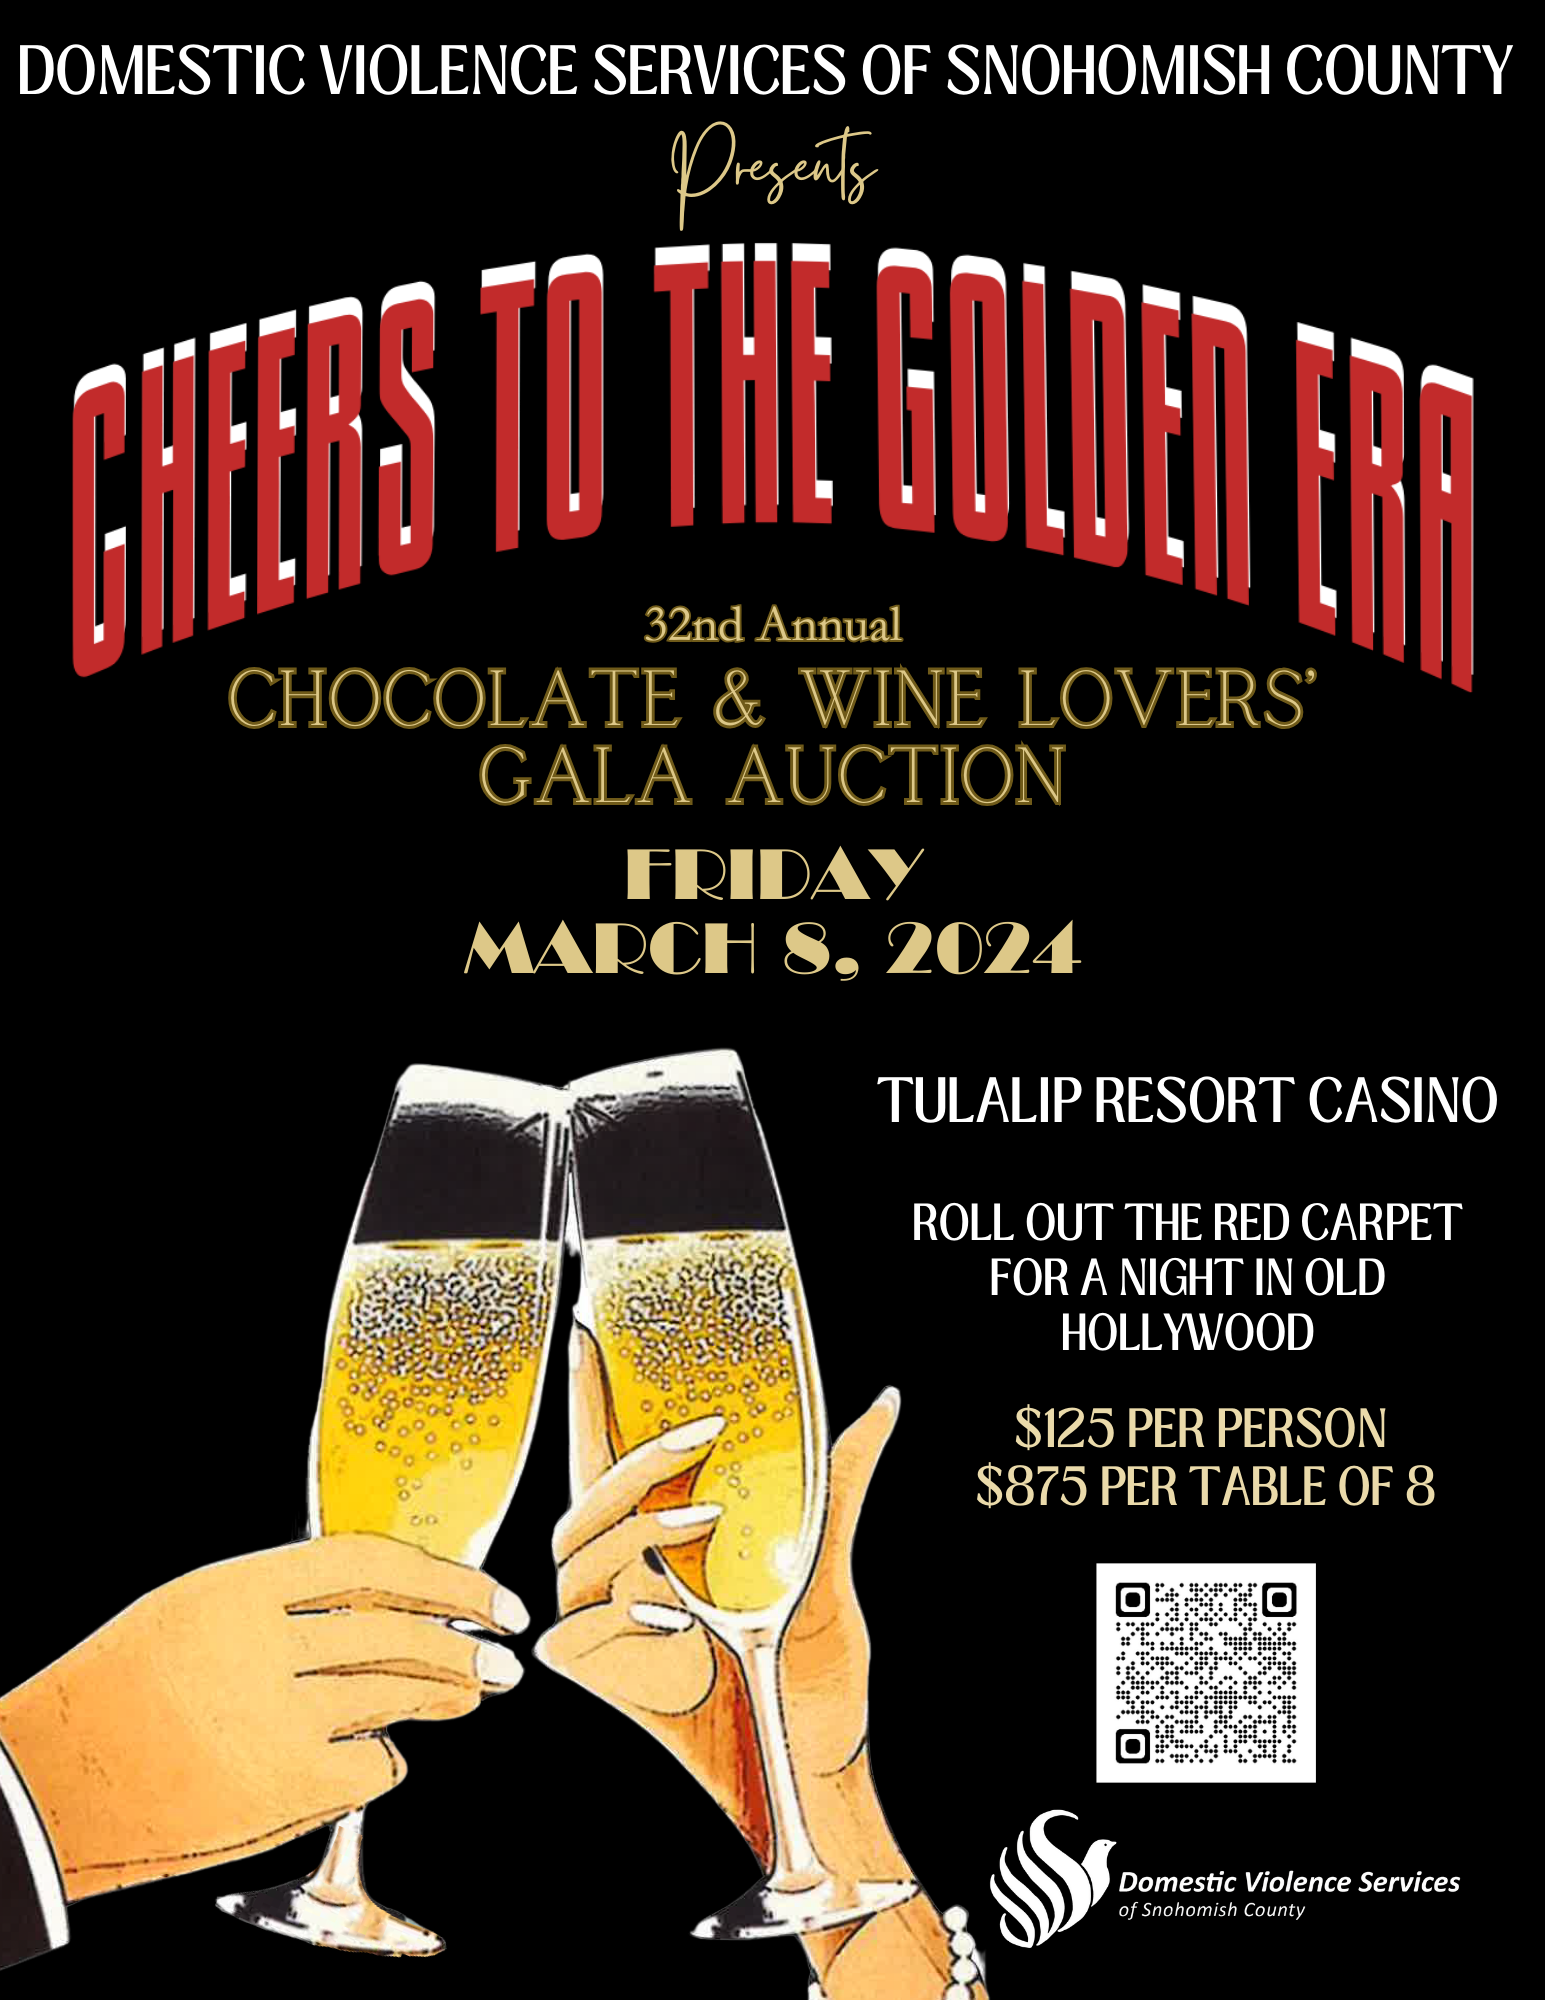 Event Promo Photo For 32nd Annual Chocolate & Wine Lovers' Gala